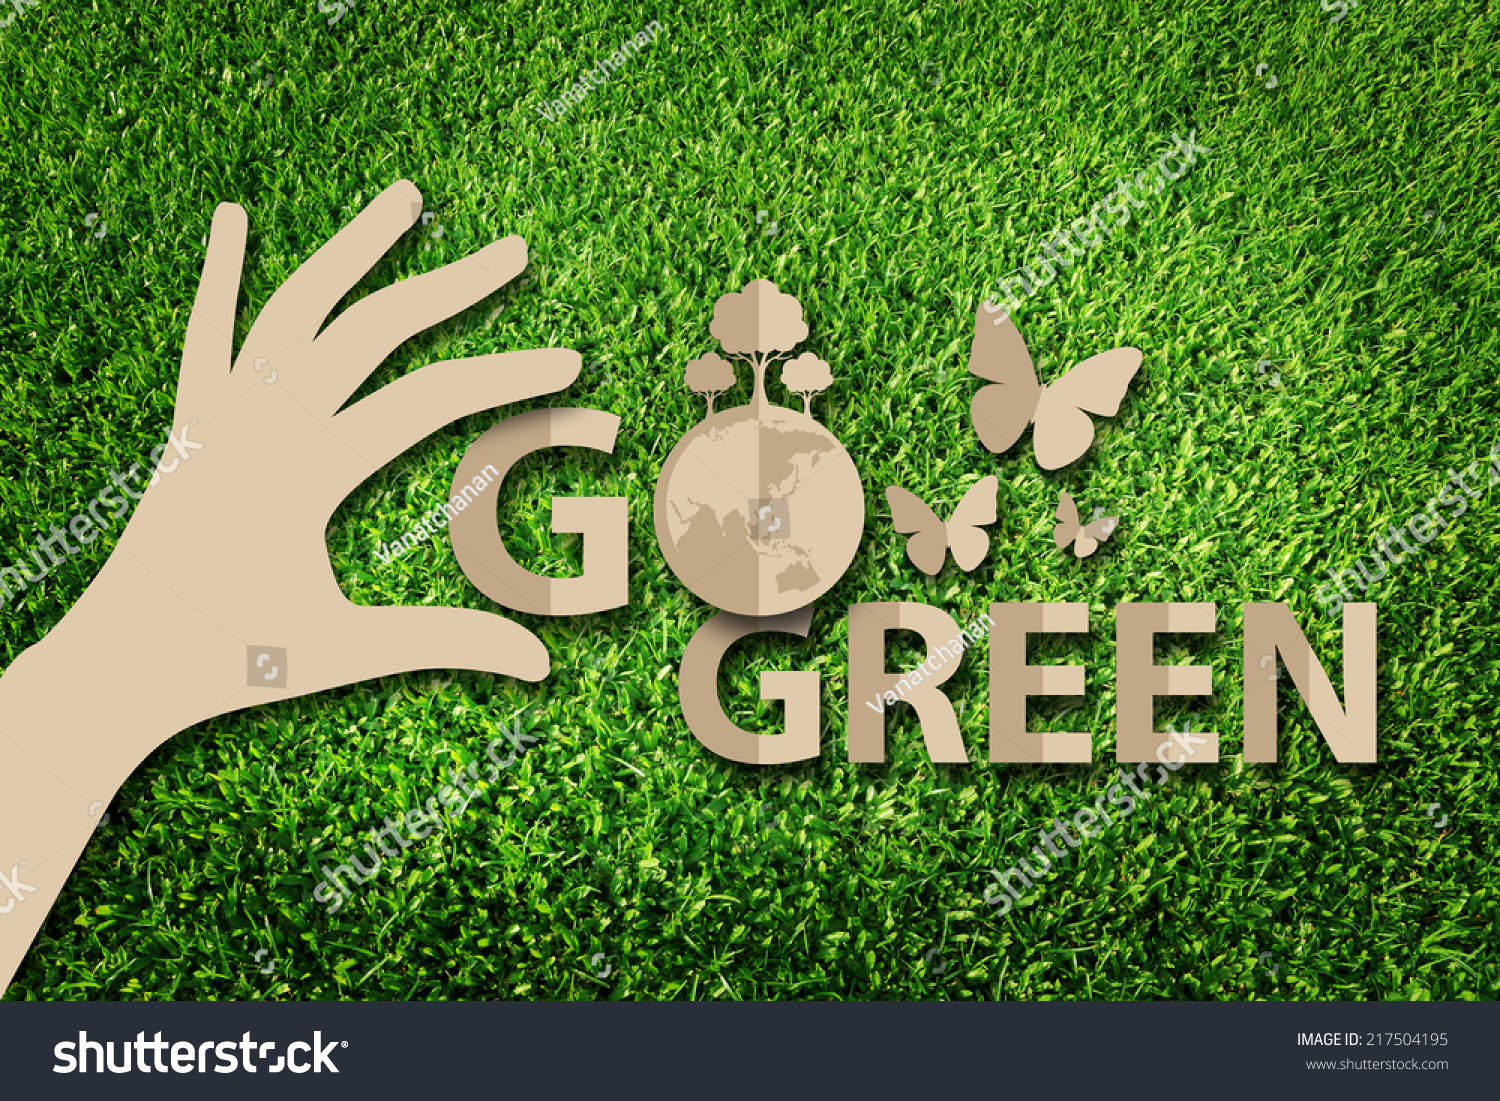 To go green or not to go green essay